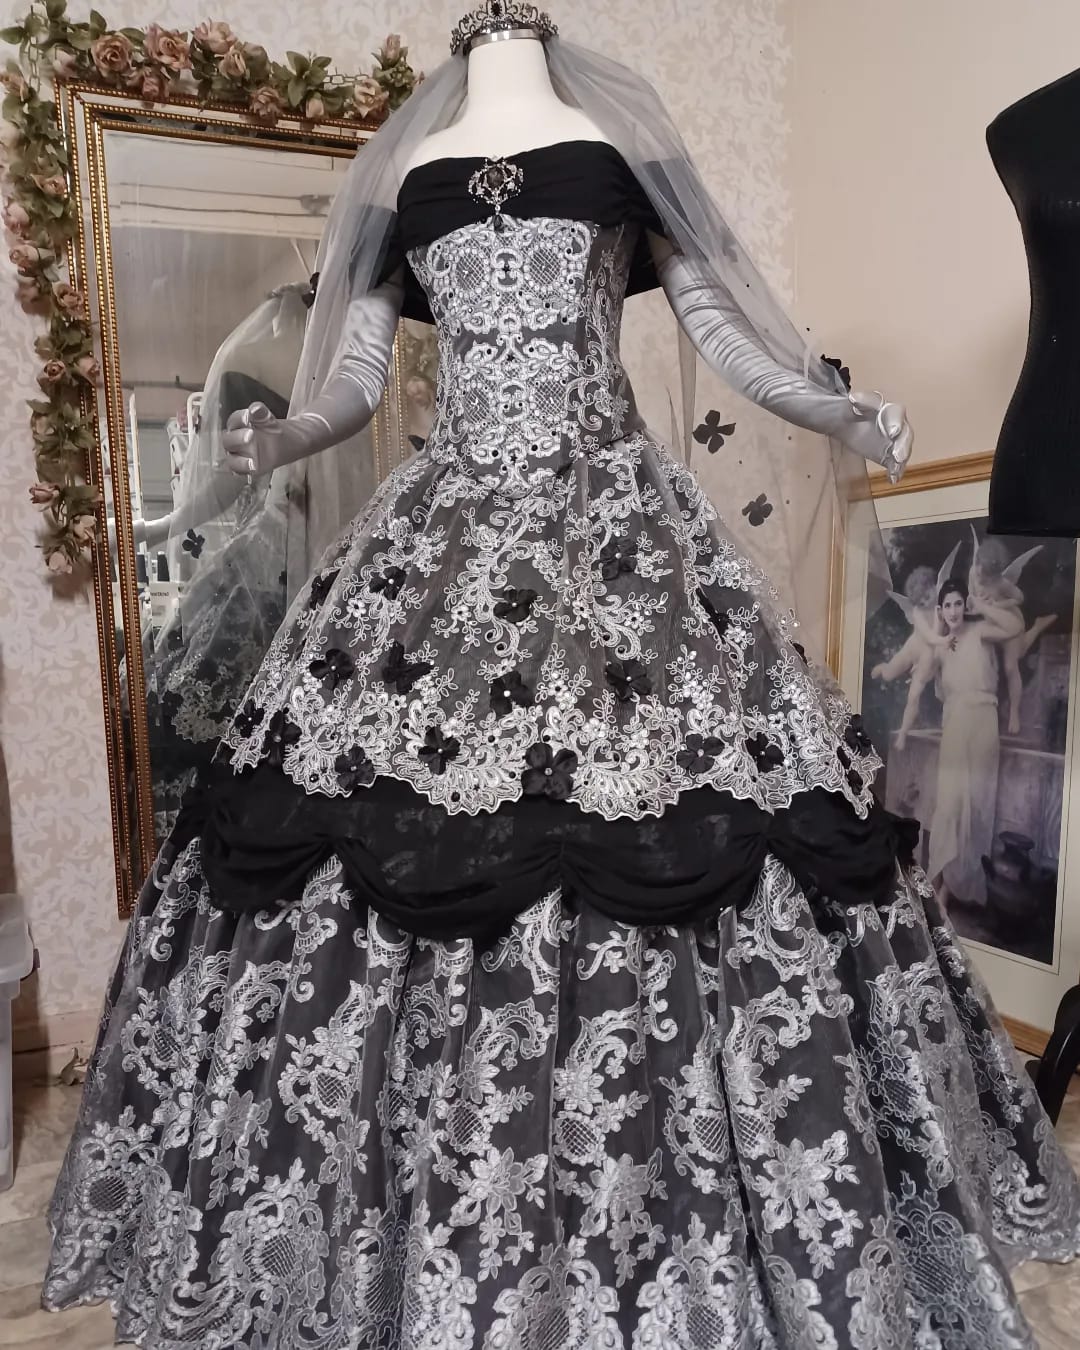 Two styles black glitter sparkling ball gown gothic wedding dress 2020 |  Ball gowns, Ball gowns wedding, Ball gown wedding dress